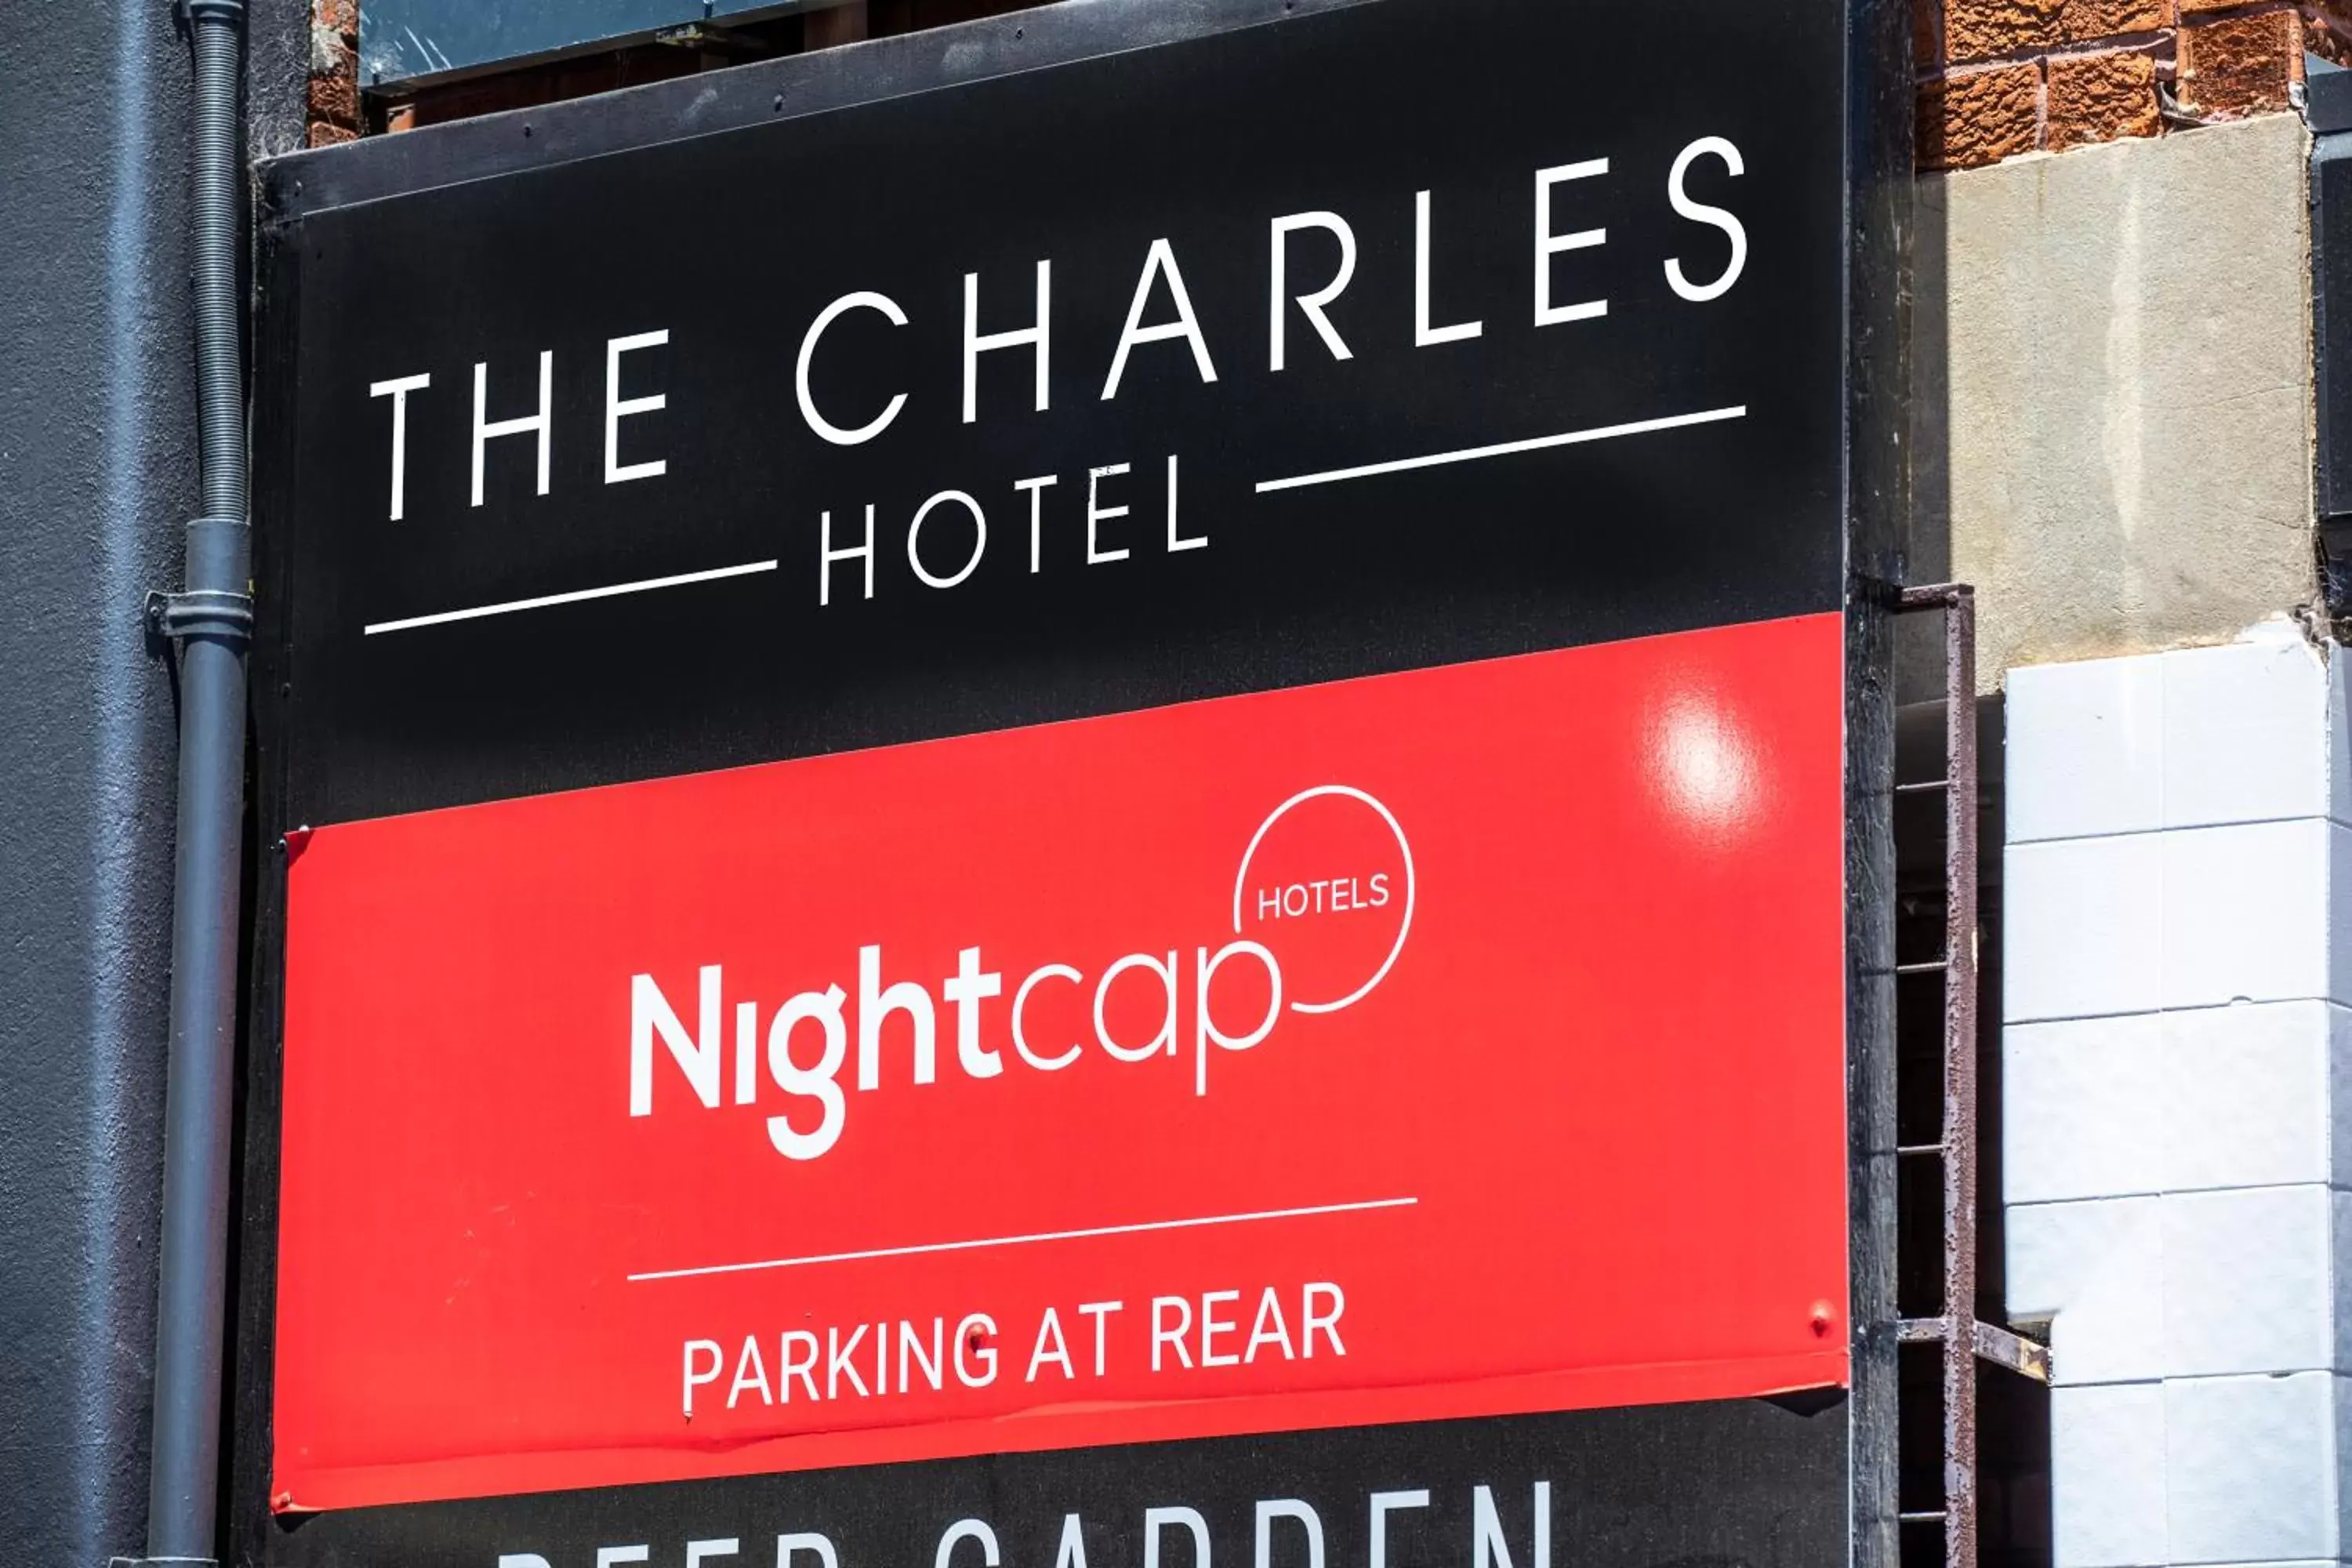 Property logo or sign, Property Logo/Sign in Nightcap at the Charles Hotel